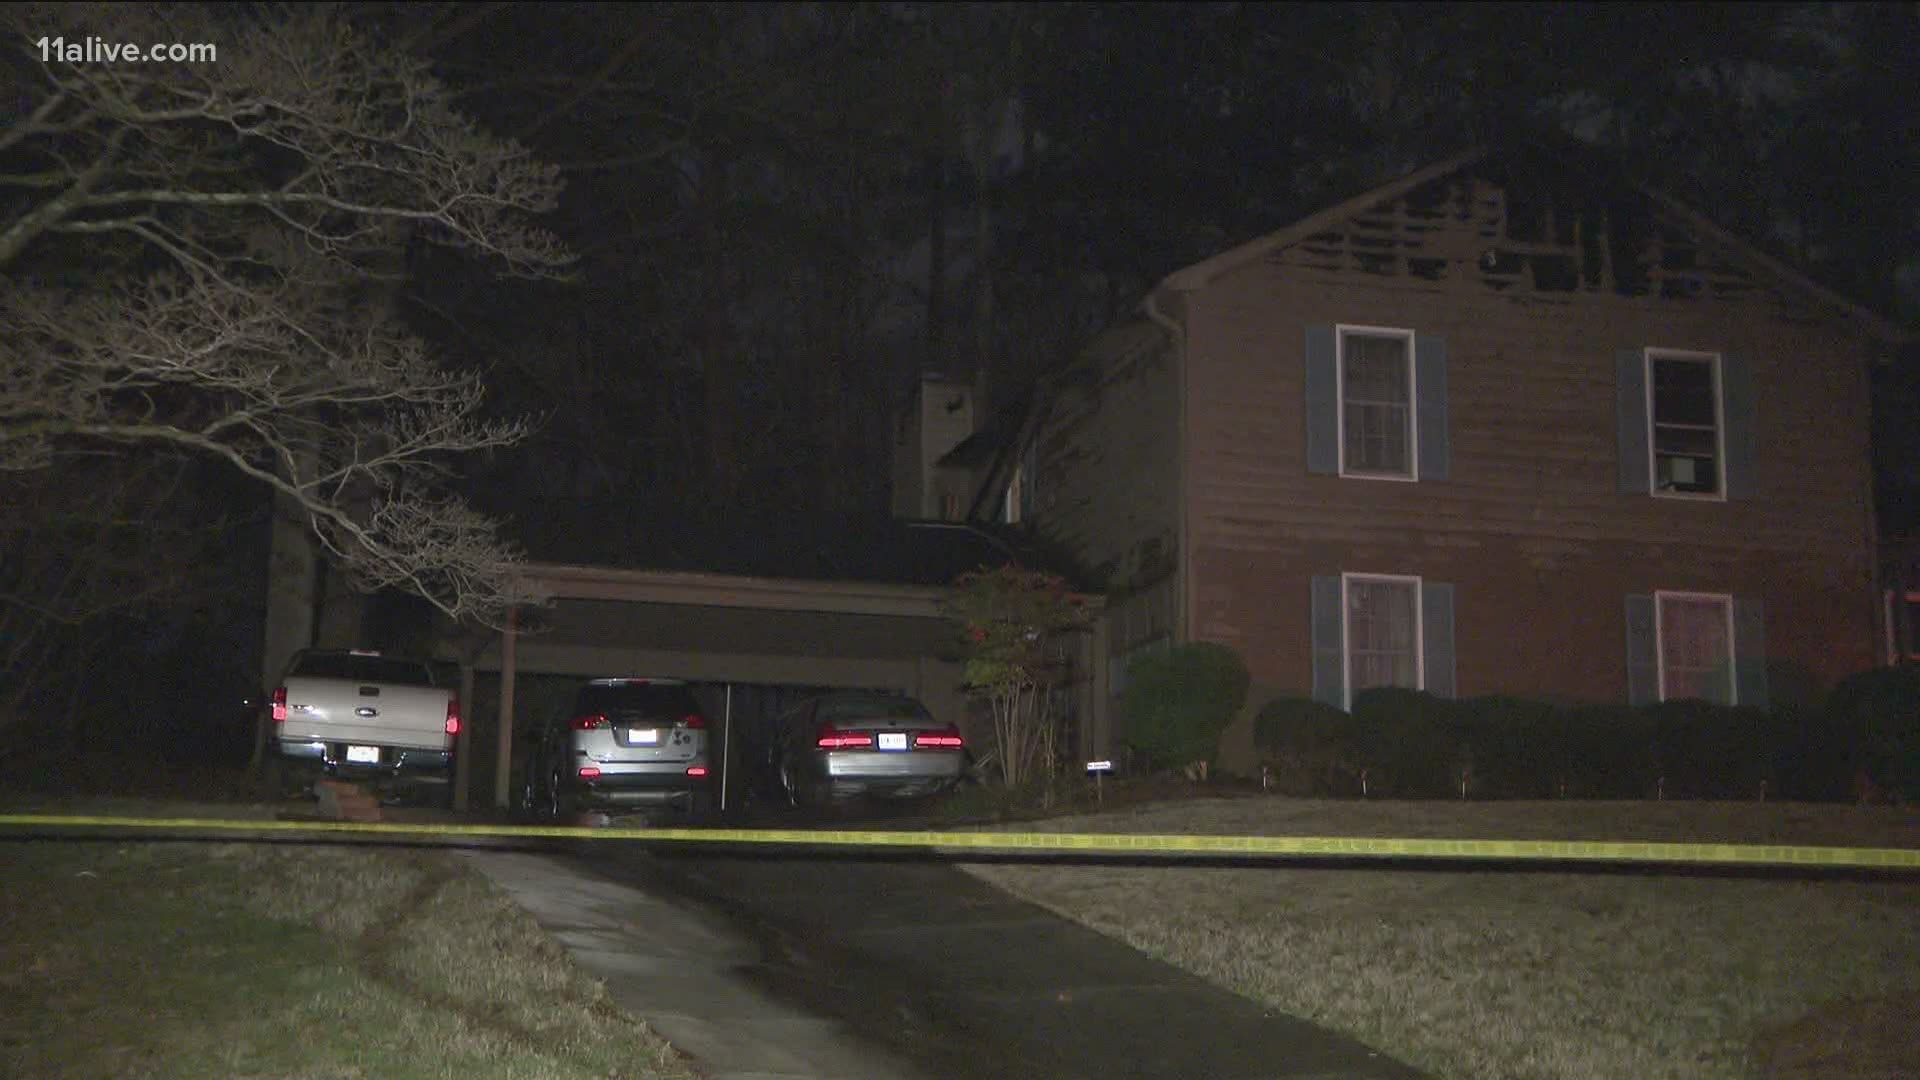 According to Gwinnett Fire officials, the incident happened just before 1 a.m. at a home on Whitney Park Drive NW.